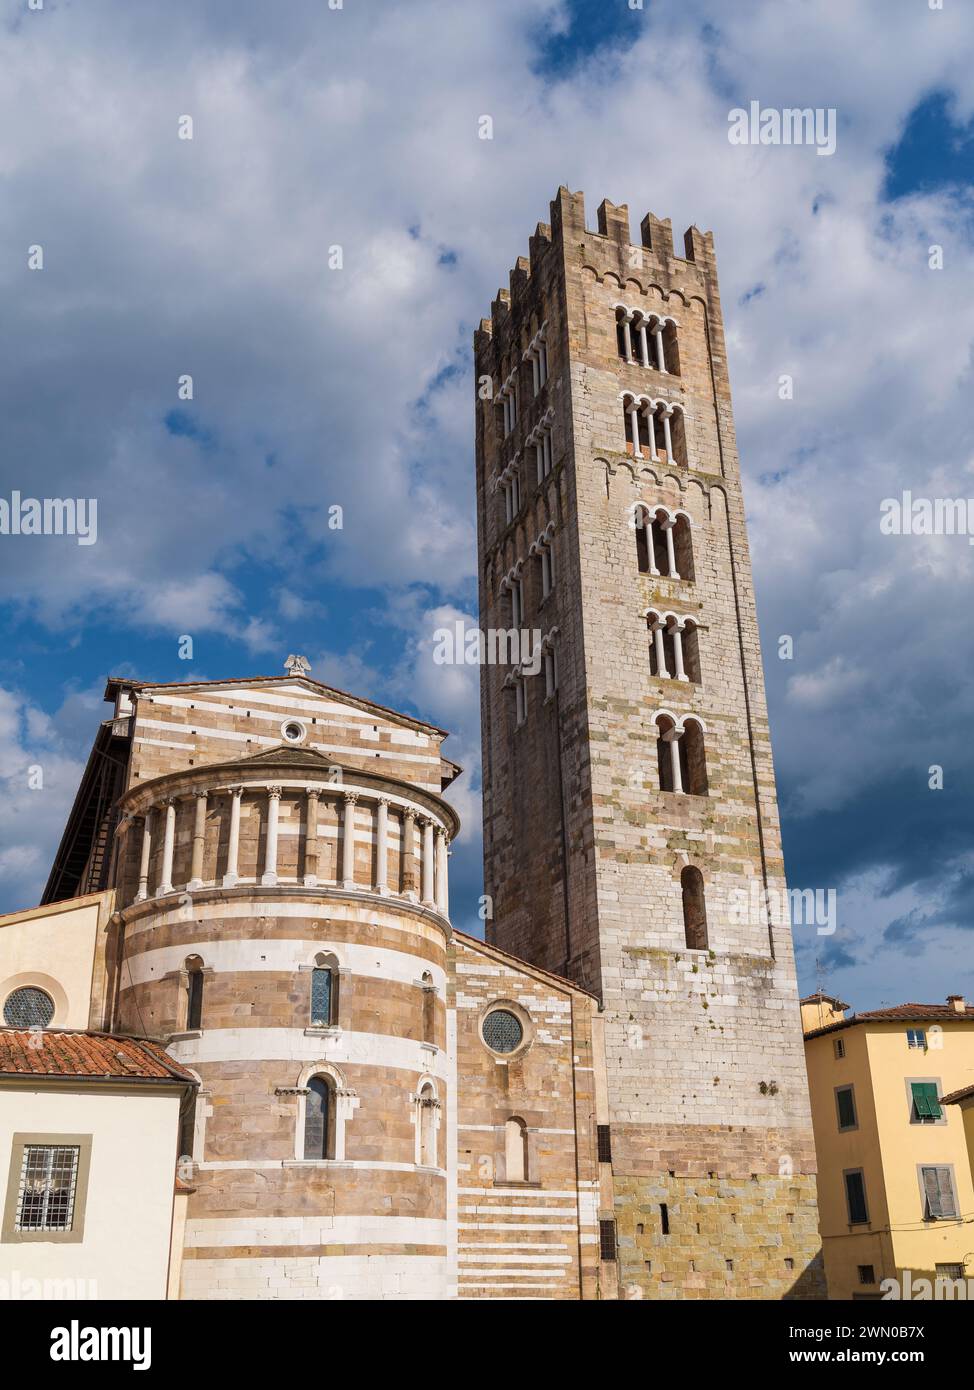 Basilica of San Frediano (St Fredianus) romanesque apse with medieval bell tower among clouds, in Lucca historical center Stock Photo